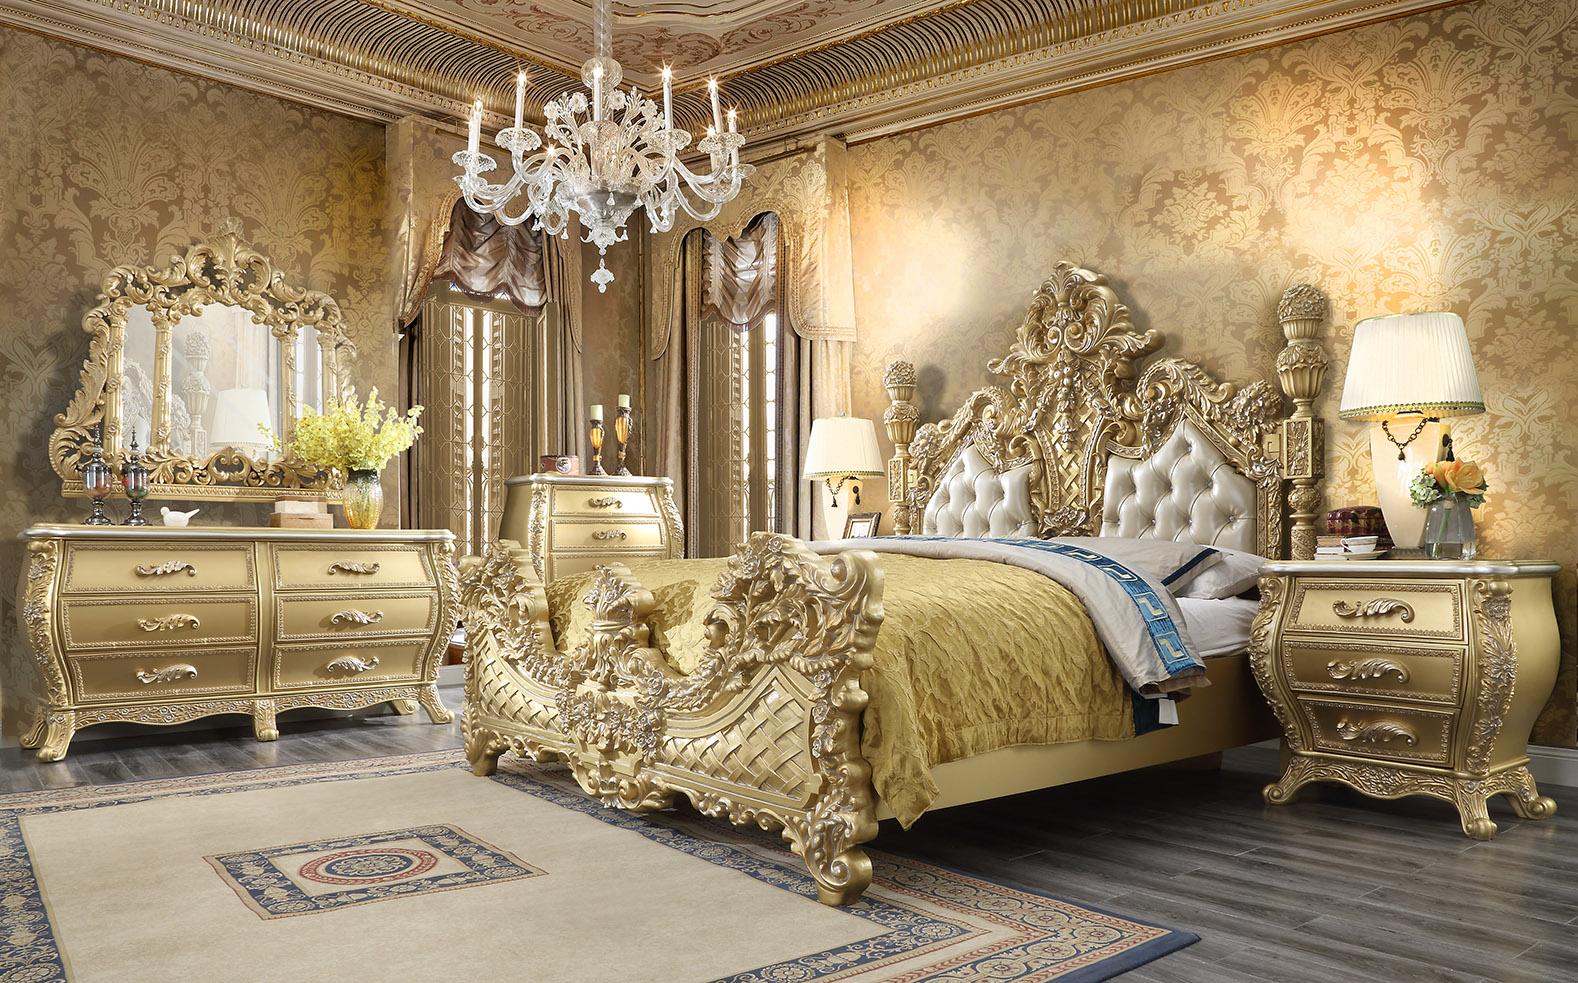 Traditional Platform Bed Set HD-1801 HD-CK1801-6PC in Metallic, Gold Finish, Antique Leather